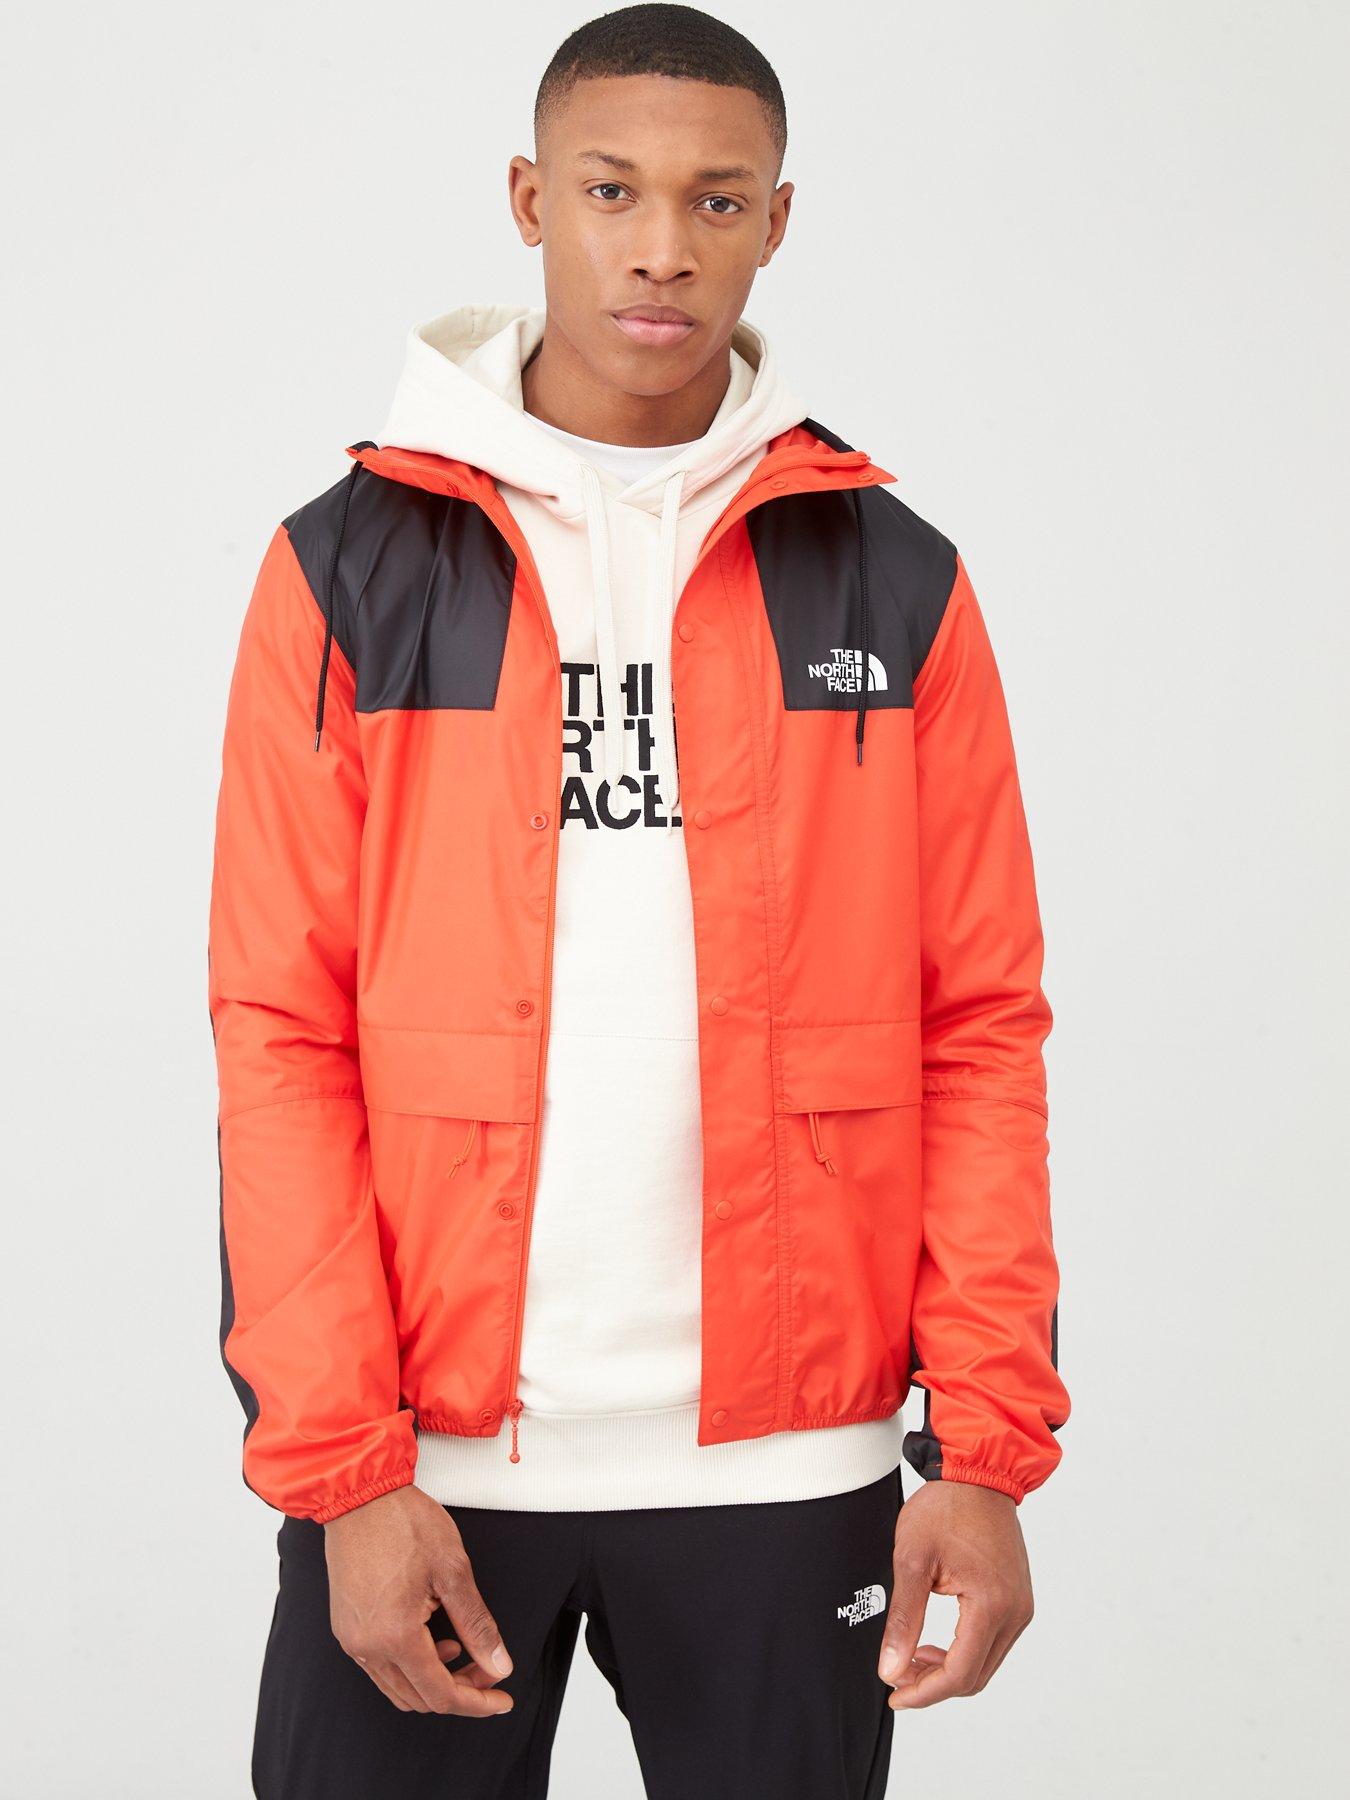 the north face 1985 mountain fly jacket red